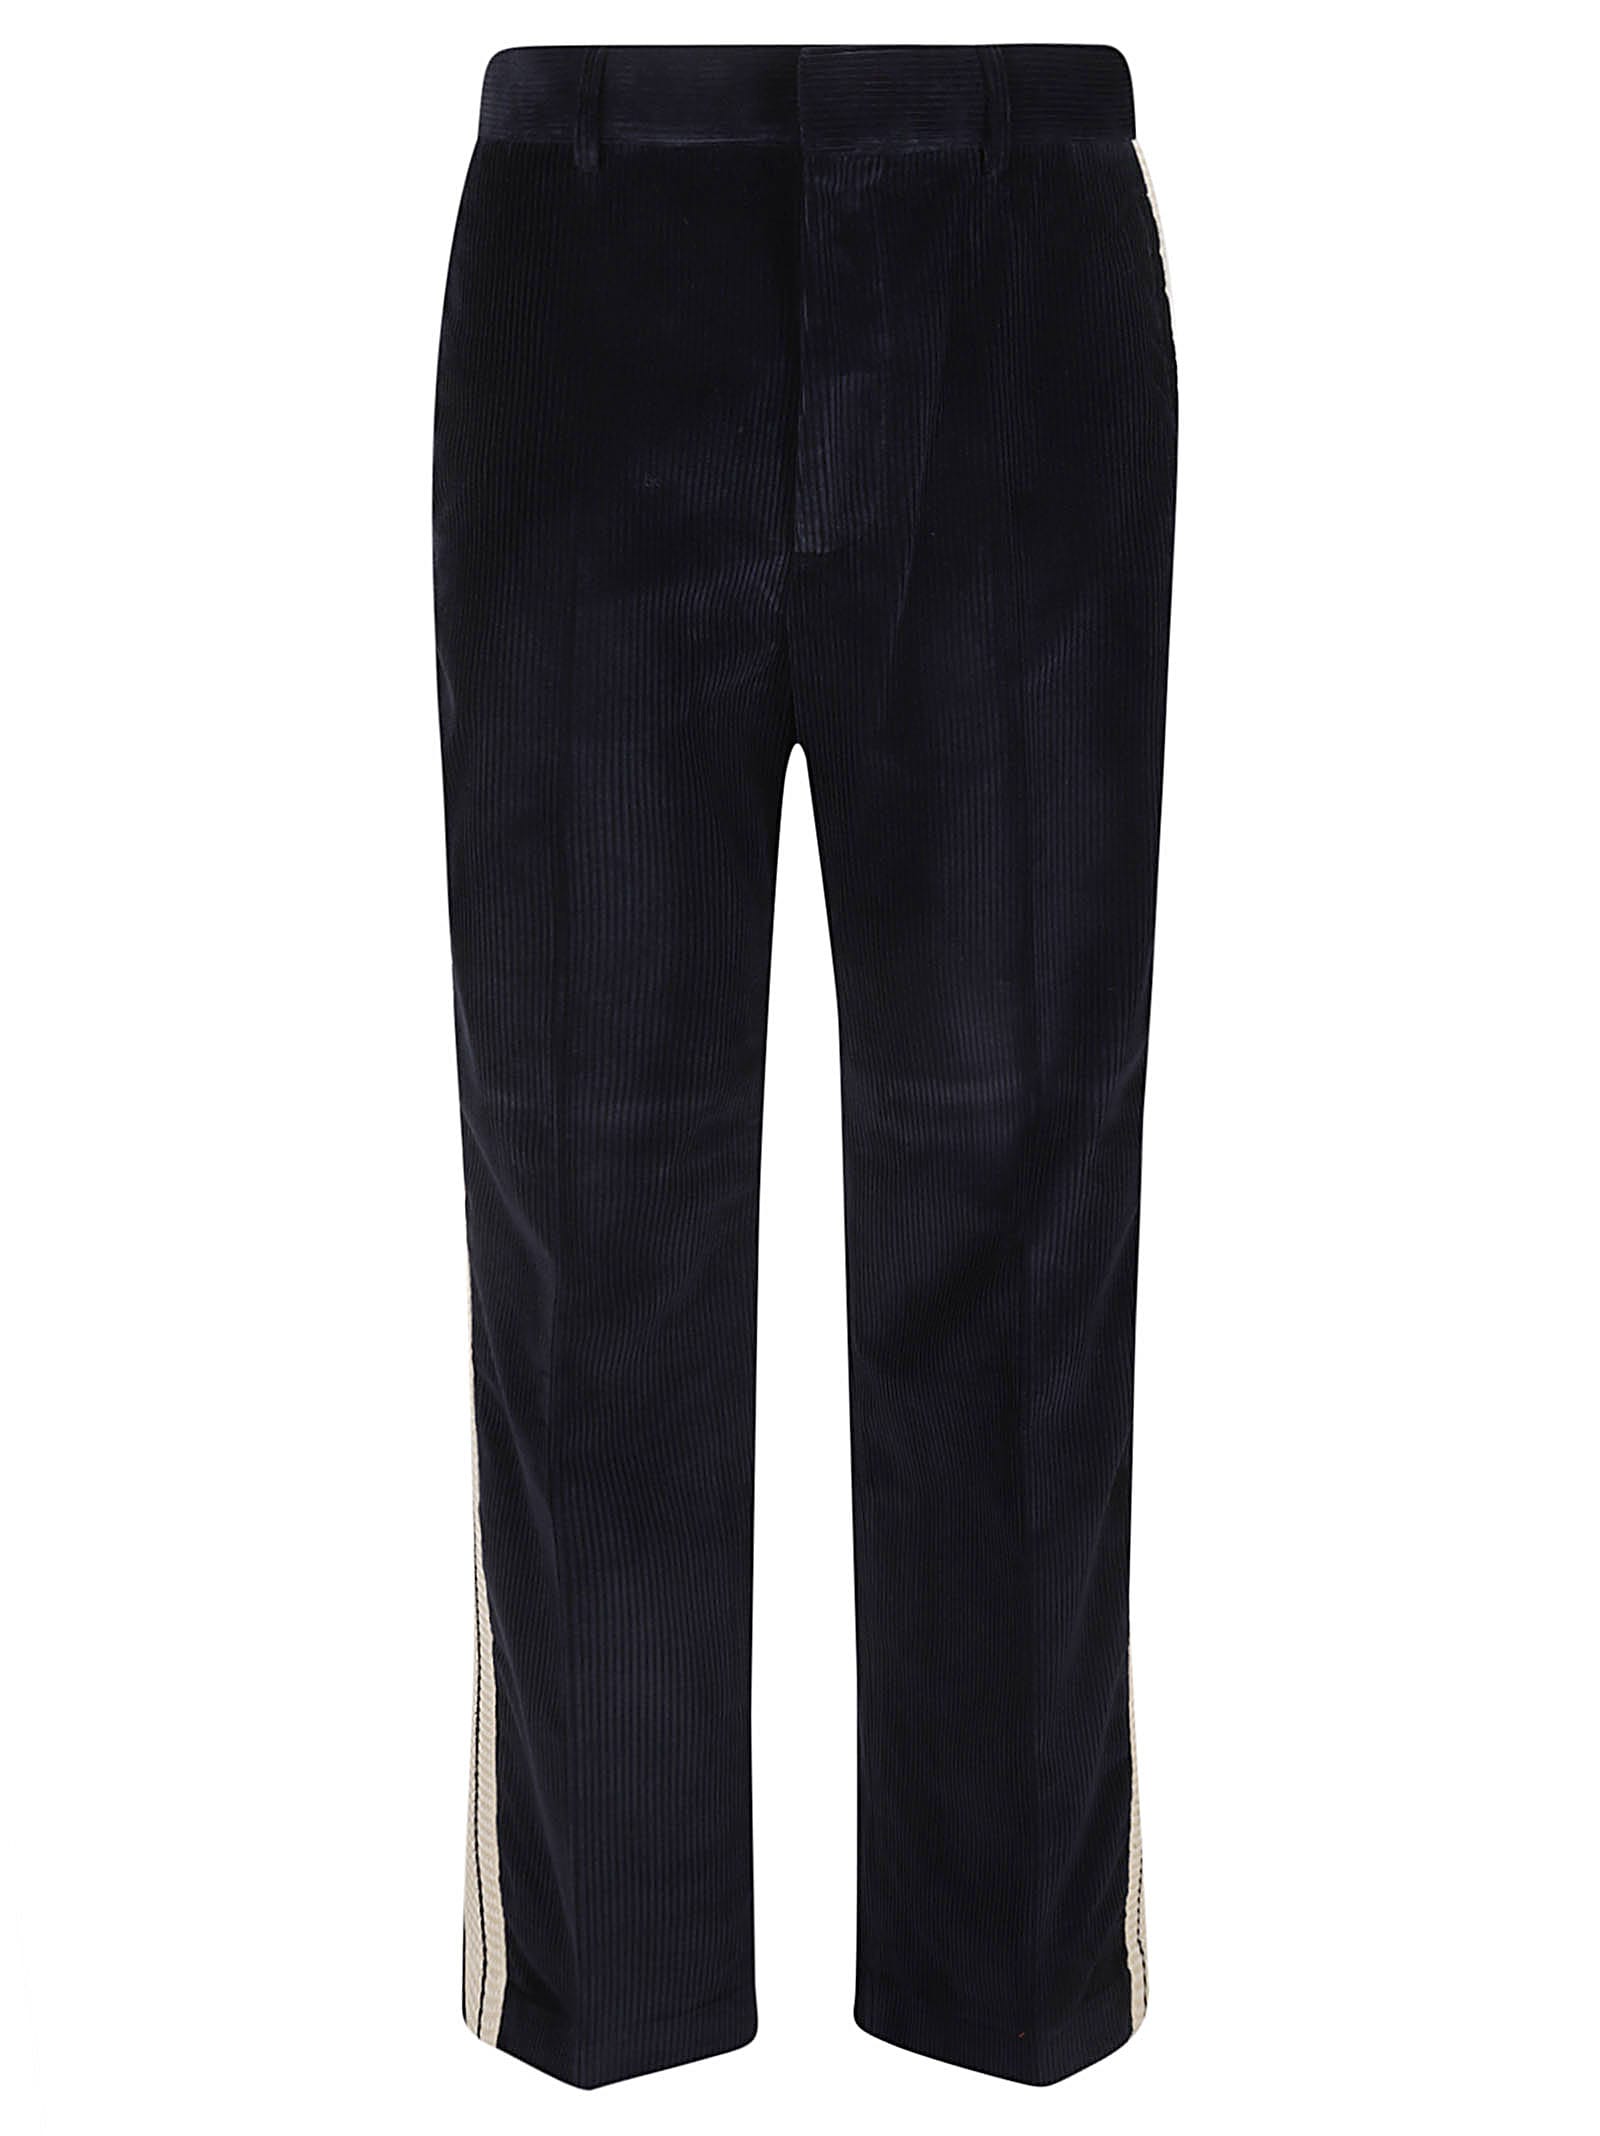 PALM ANGELS CORDUROY SUIT TAPE TROUSERS